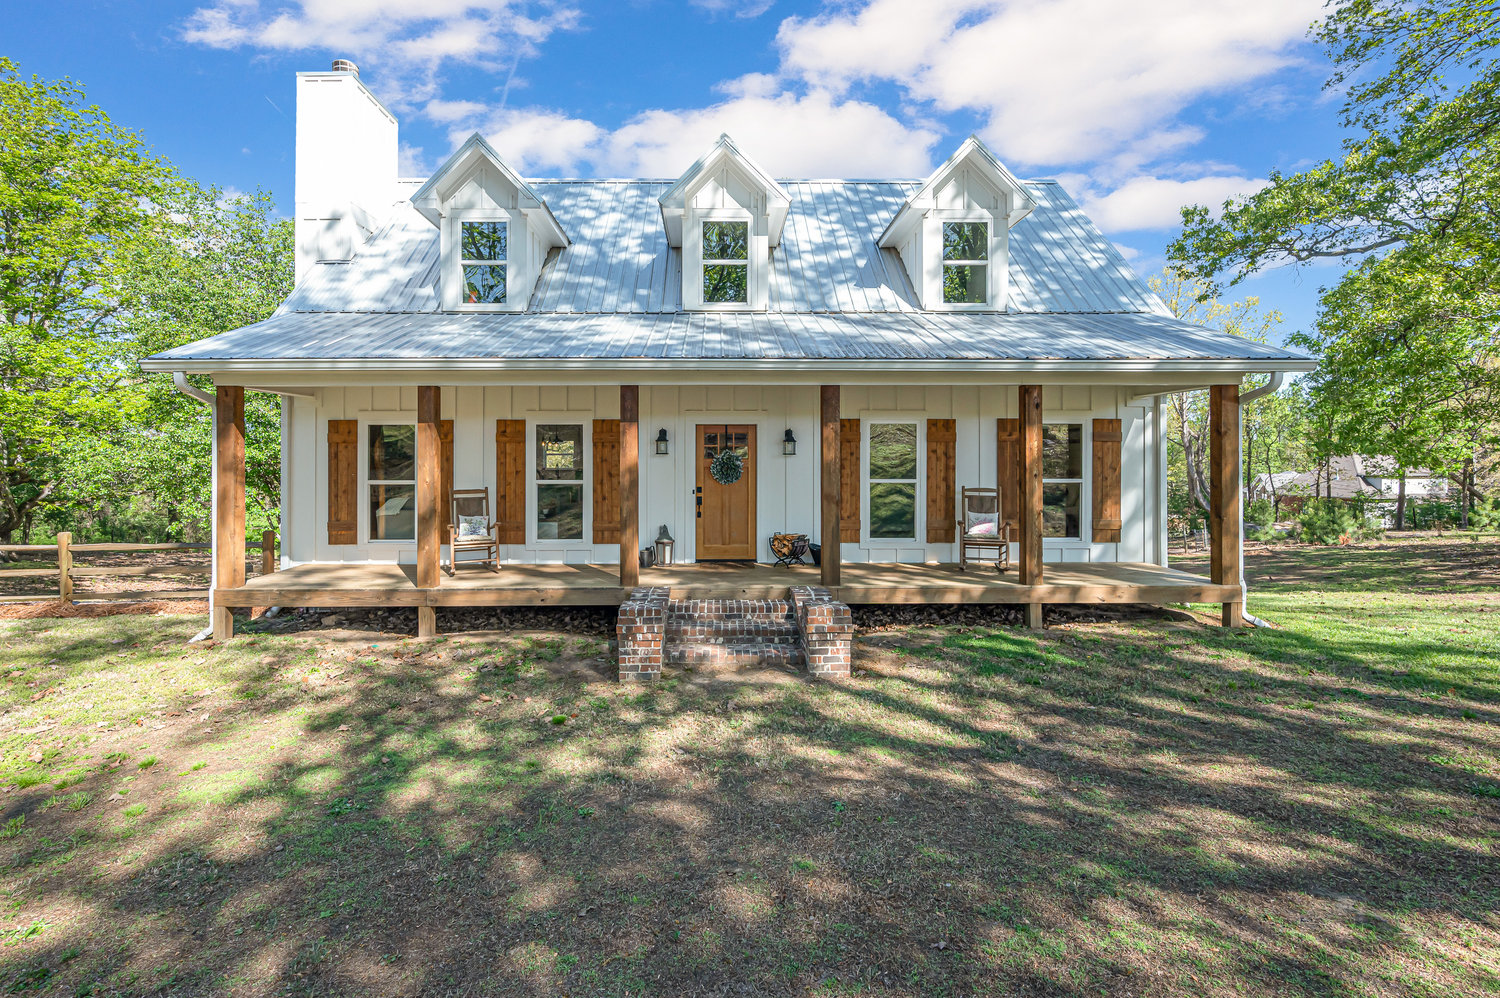 Virtual Tour of Birmingham Metro Real Estate Listing For Sale | 4530 South Shades Crest Road, Helena, AL 35022